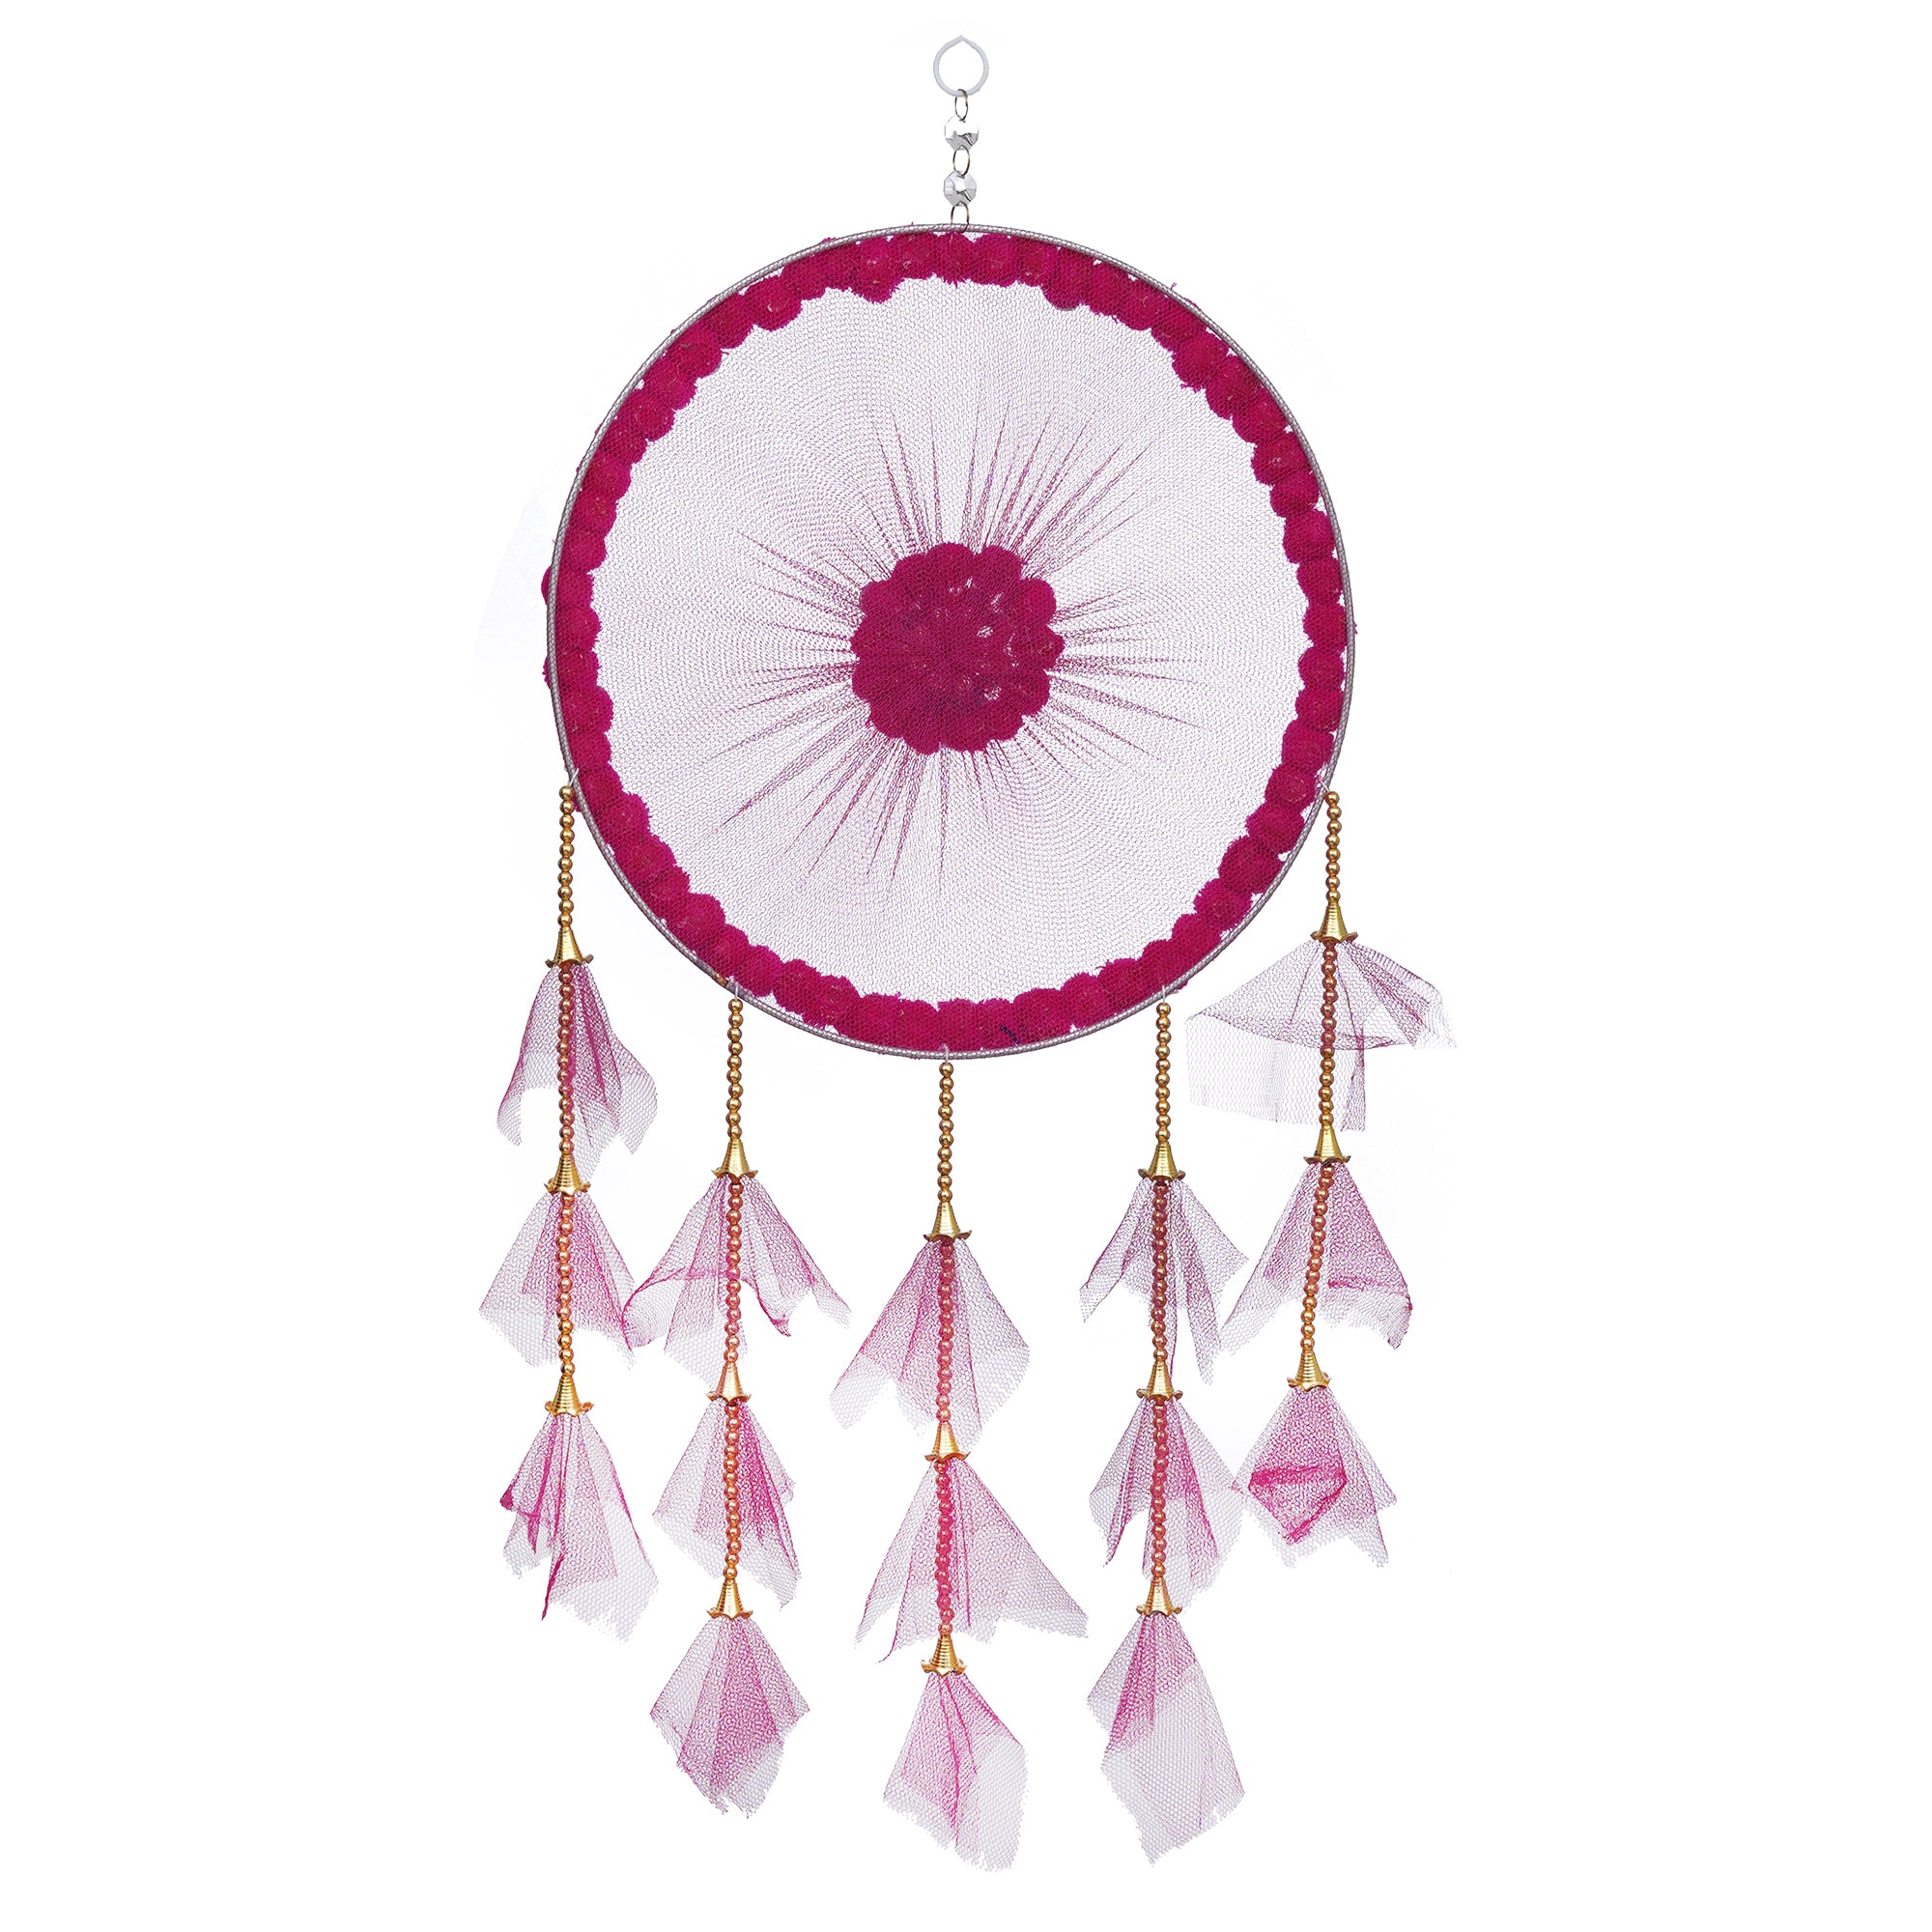 eCraftIndia Pink Wall Hanging Dream Catcher For Home Decor - Perfect Window, Bedroom, Living Room, Wall Decoration Item 8